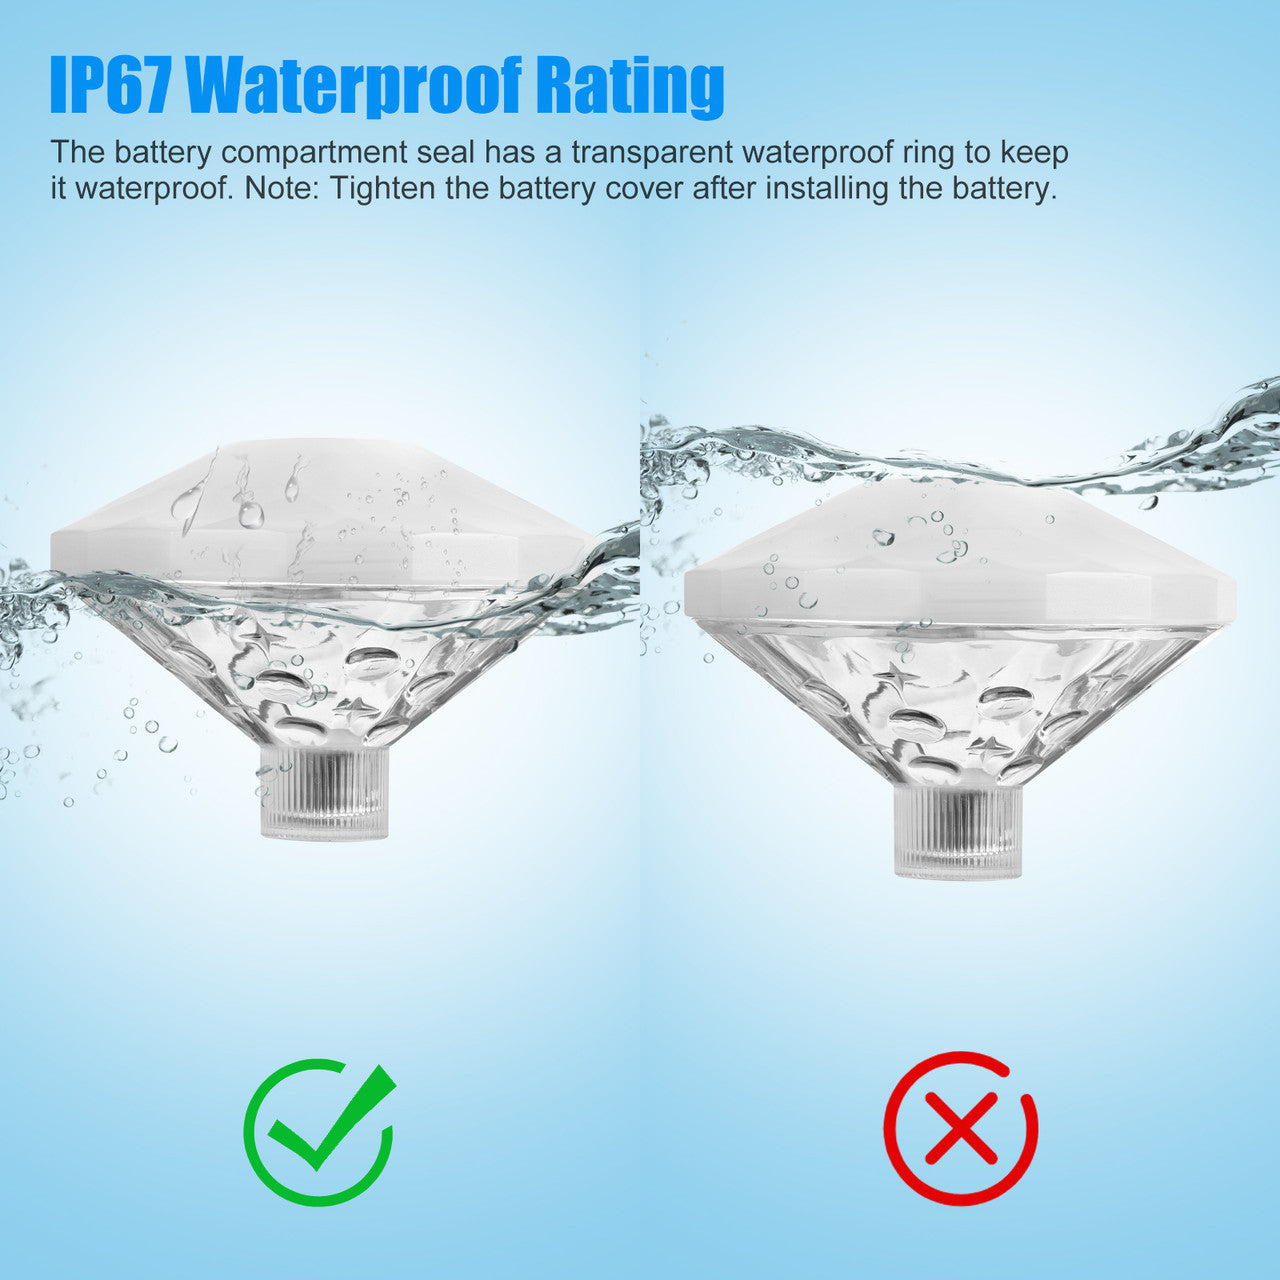 LED Diamond Pool Light with 8 Different Light Modes, IP67 Waterproof Rating, Batteries Required